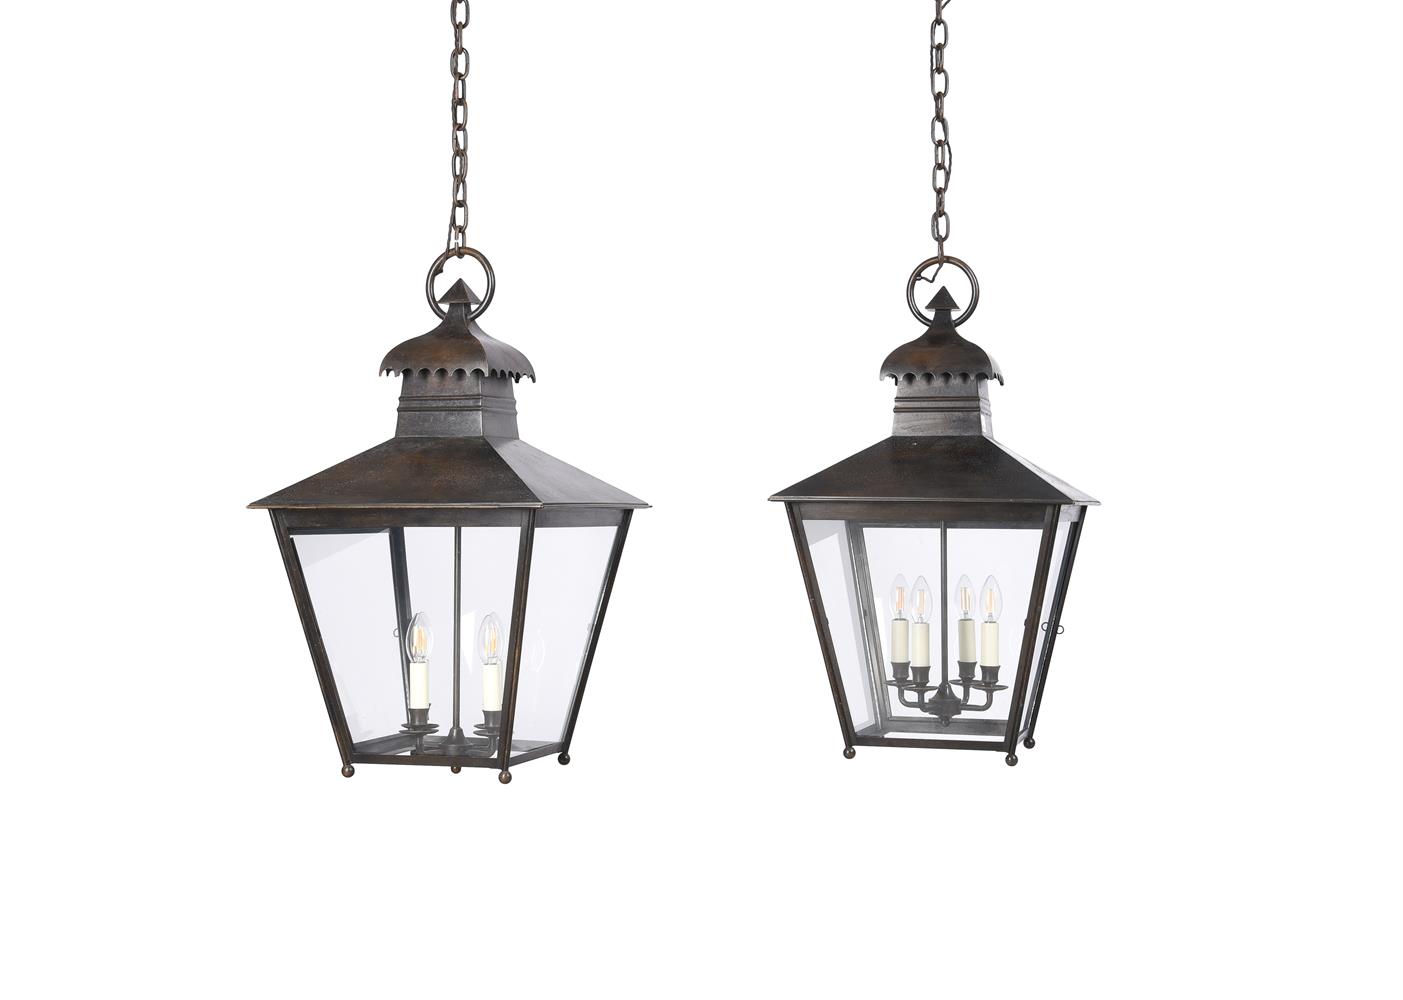 A PAIR OF PATINATED METAL CHARLES EDWARDS HALL LANTERNS IN 19TH CENTURY TASTE - Image 2 of 2